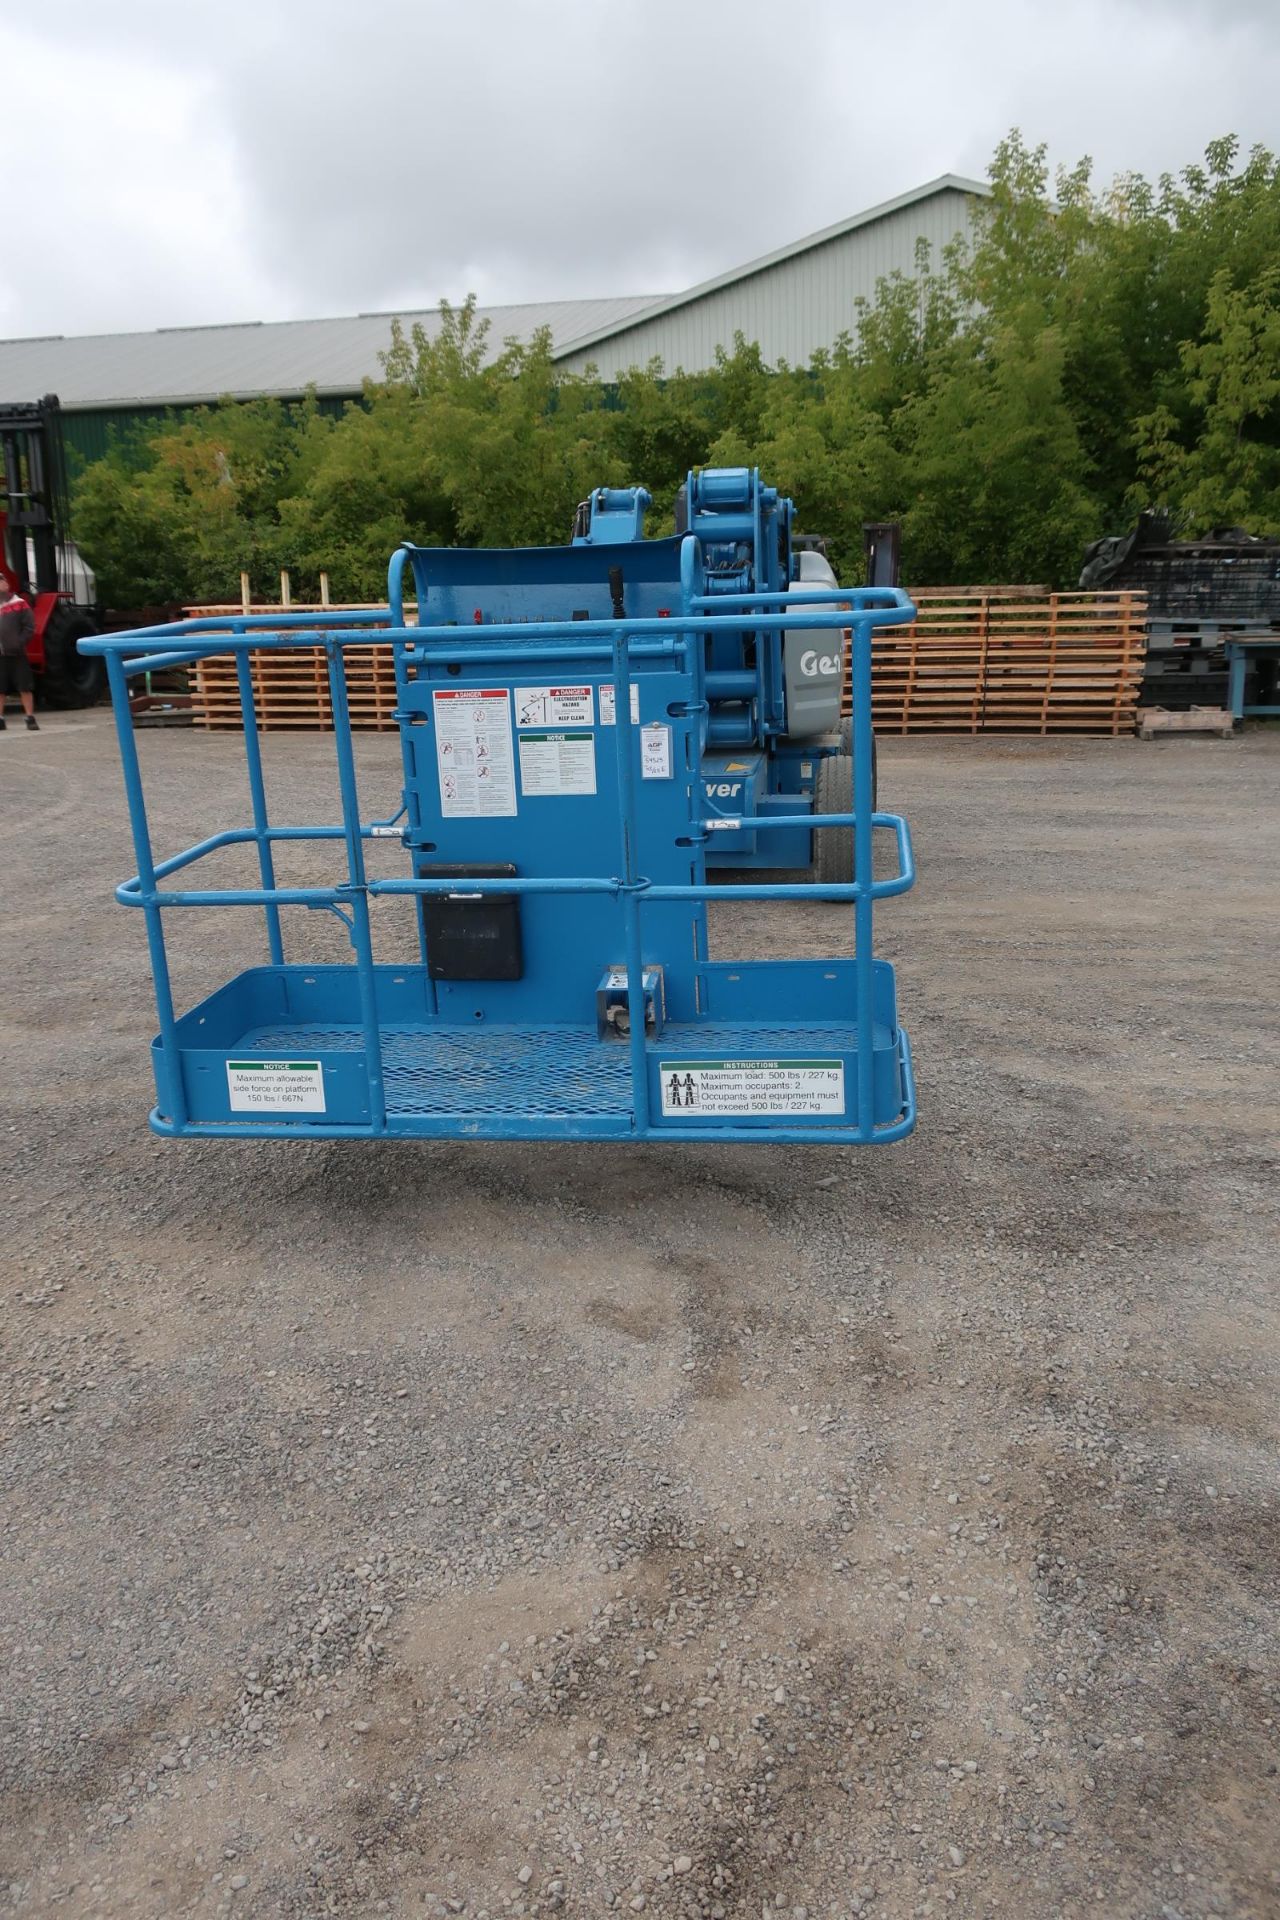 FREE CUSTOMS - MINT Genie Zoom Boom Articulating Lift model Z-45/25 45' height Electric LOW HOURS - Image 2 of 4